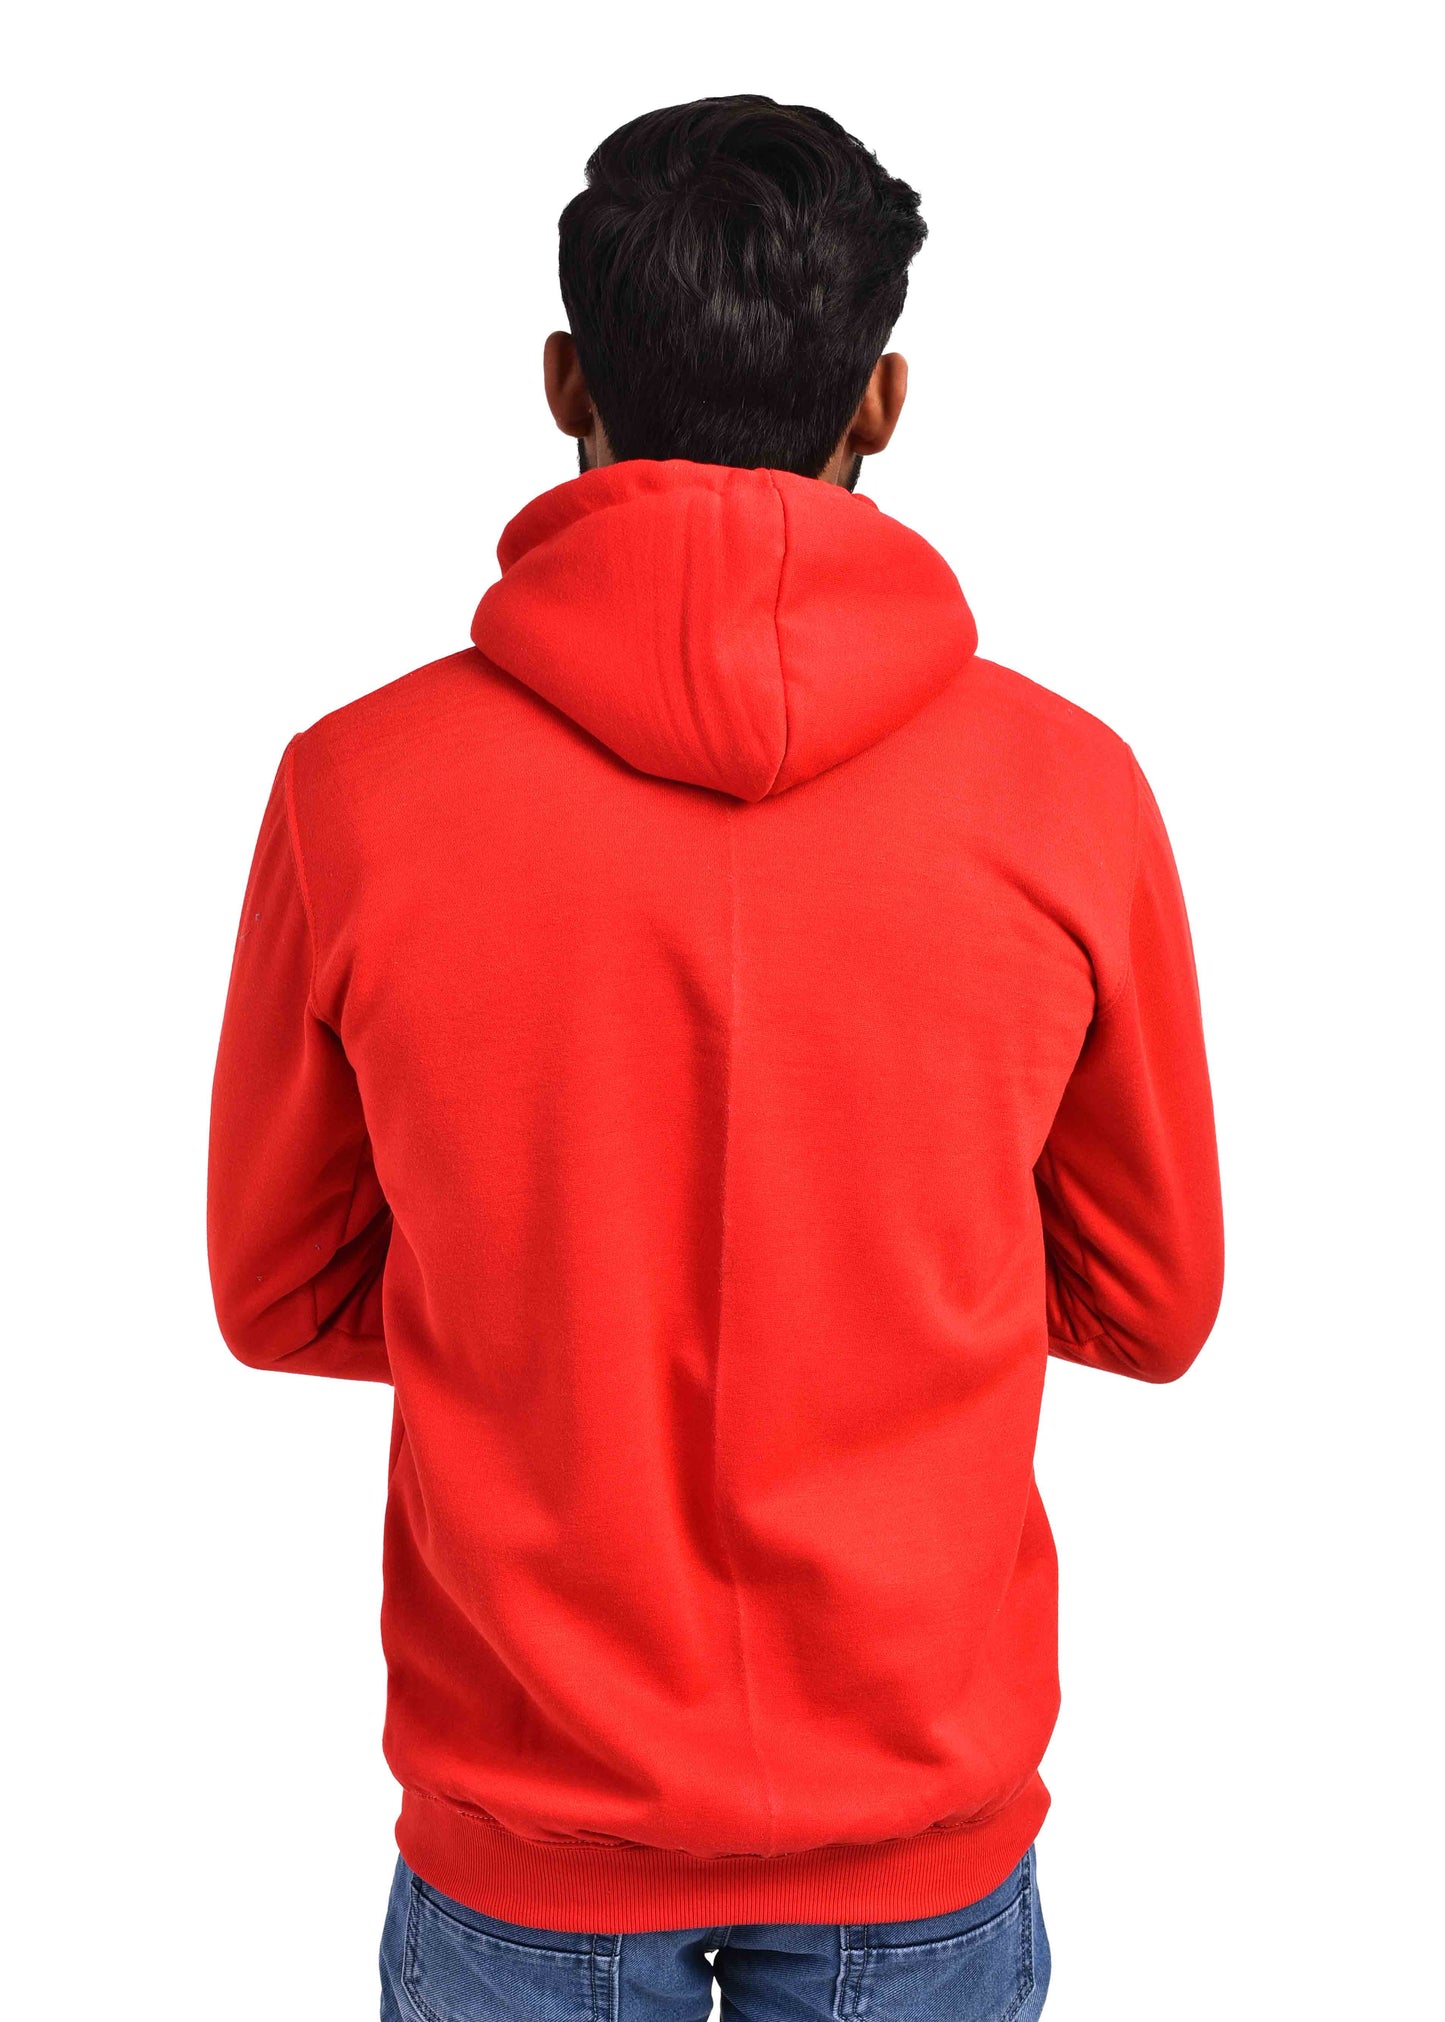 Red & White Casual Hoodies Red for Men's